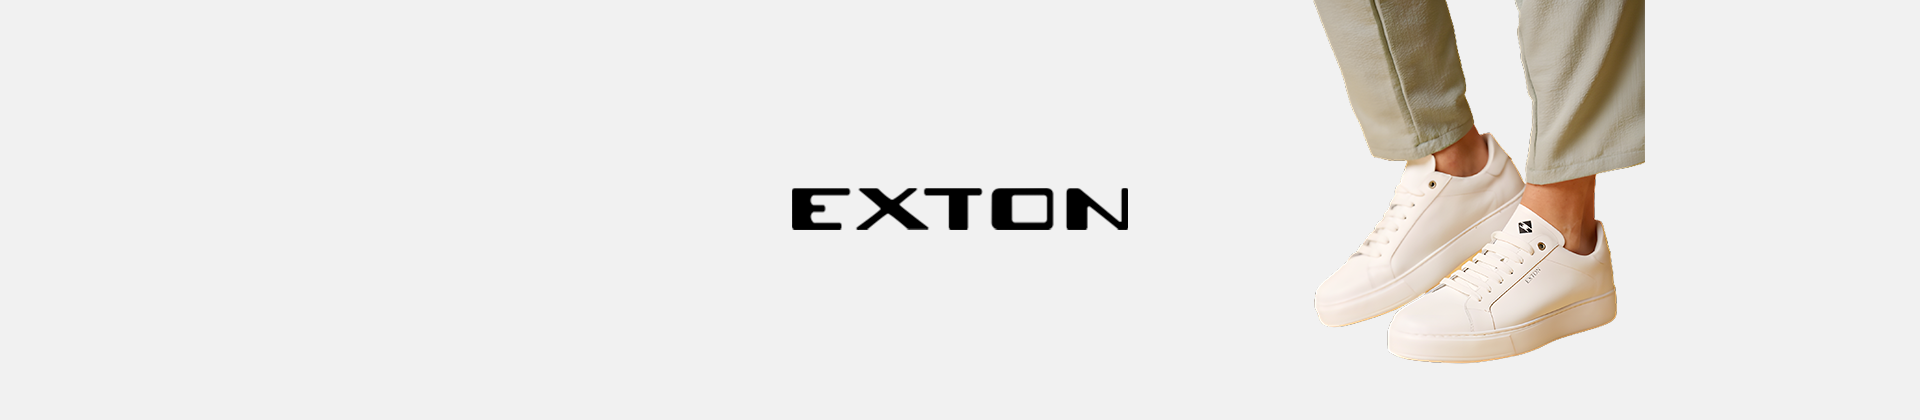 Exton shoes for sale online